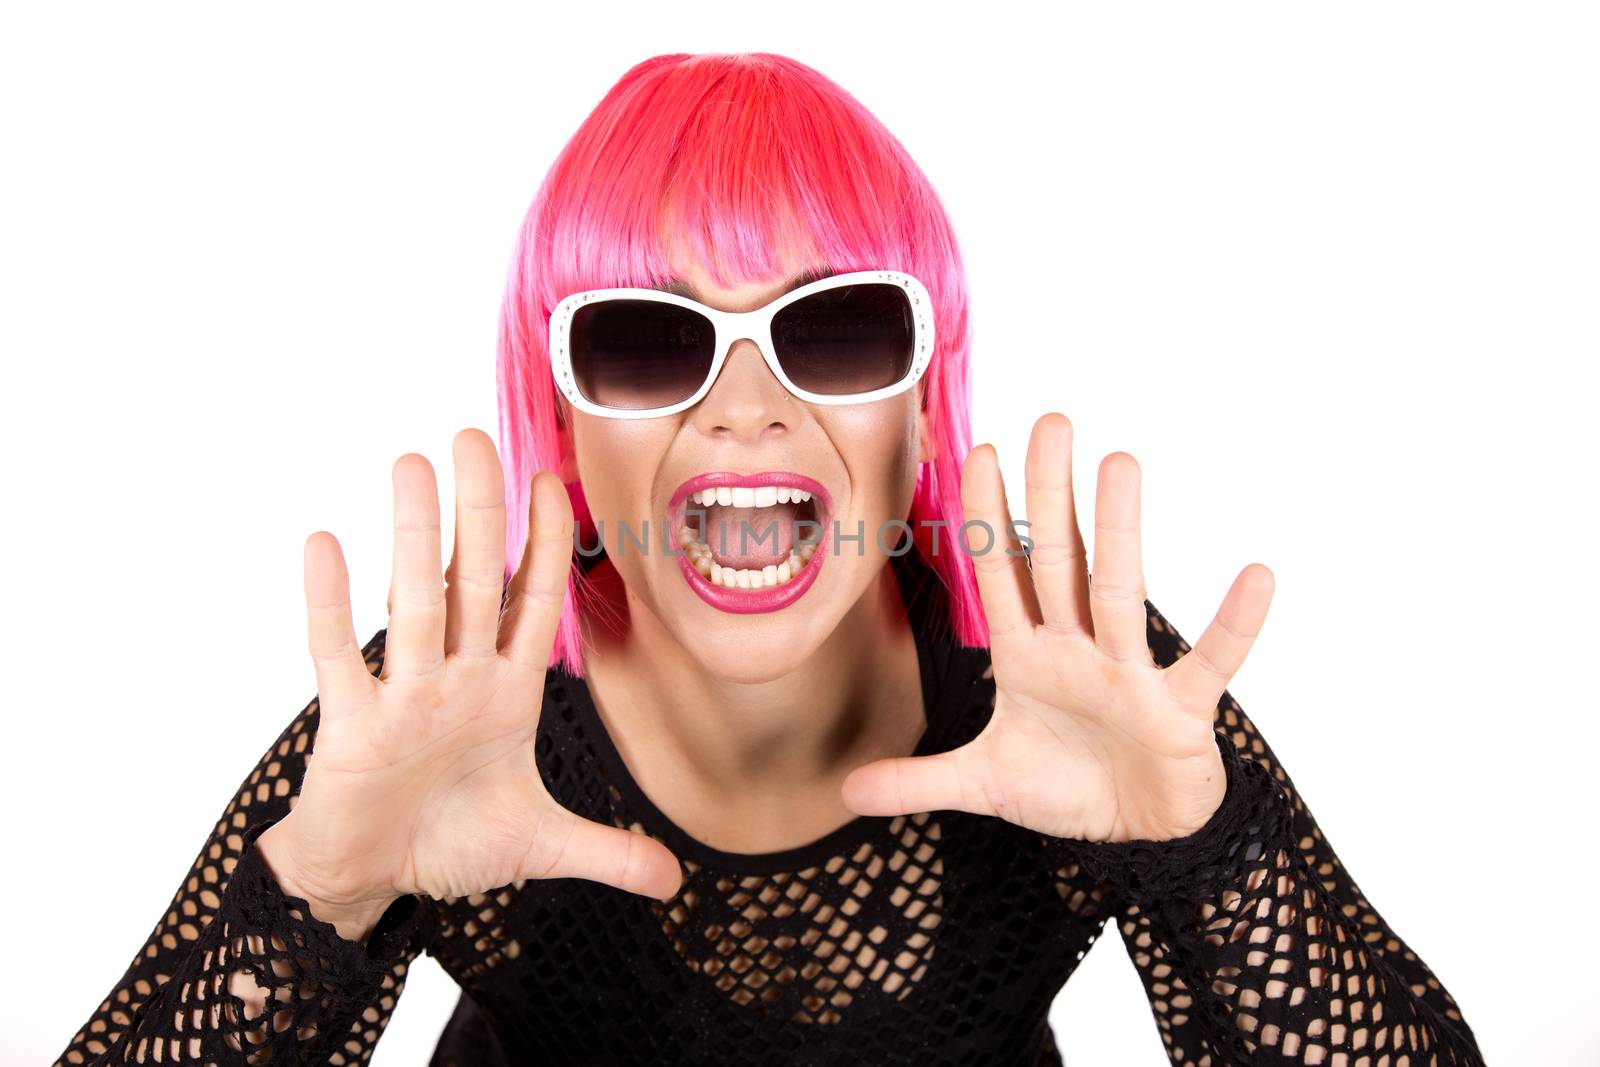 woman with pink hair wearing colorful stylish outfit